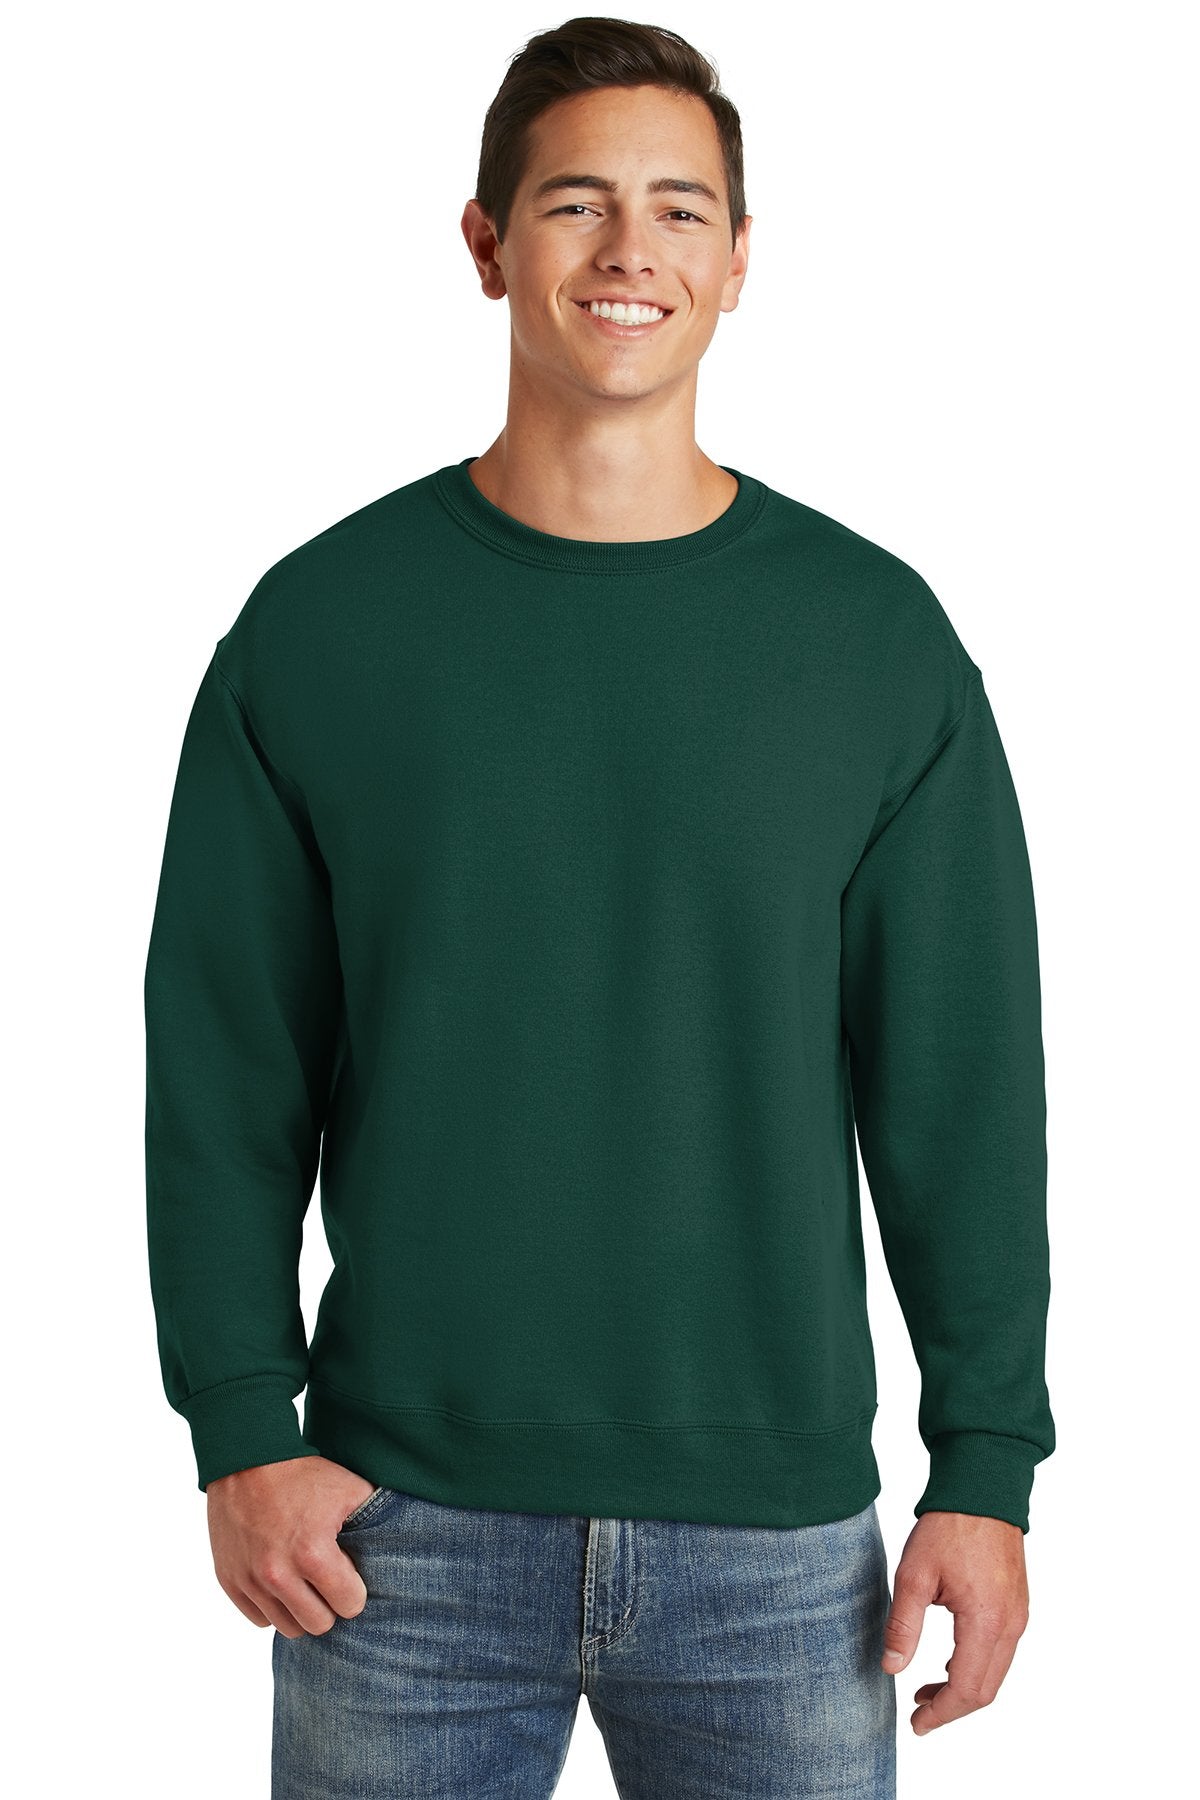 Jerzees Forest Green 4662M custom embroidered sweatshirts